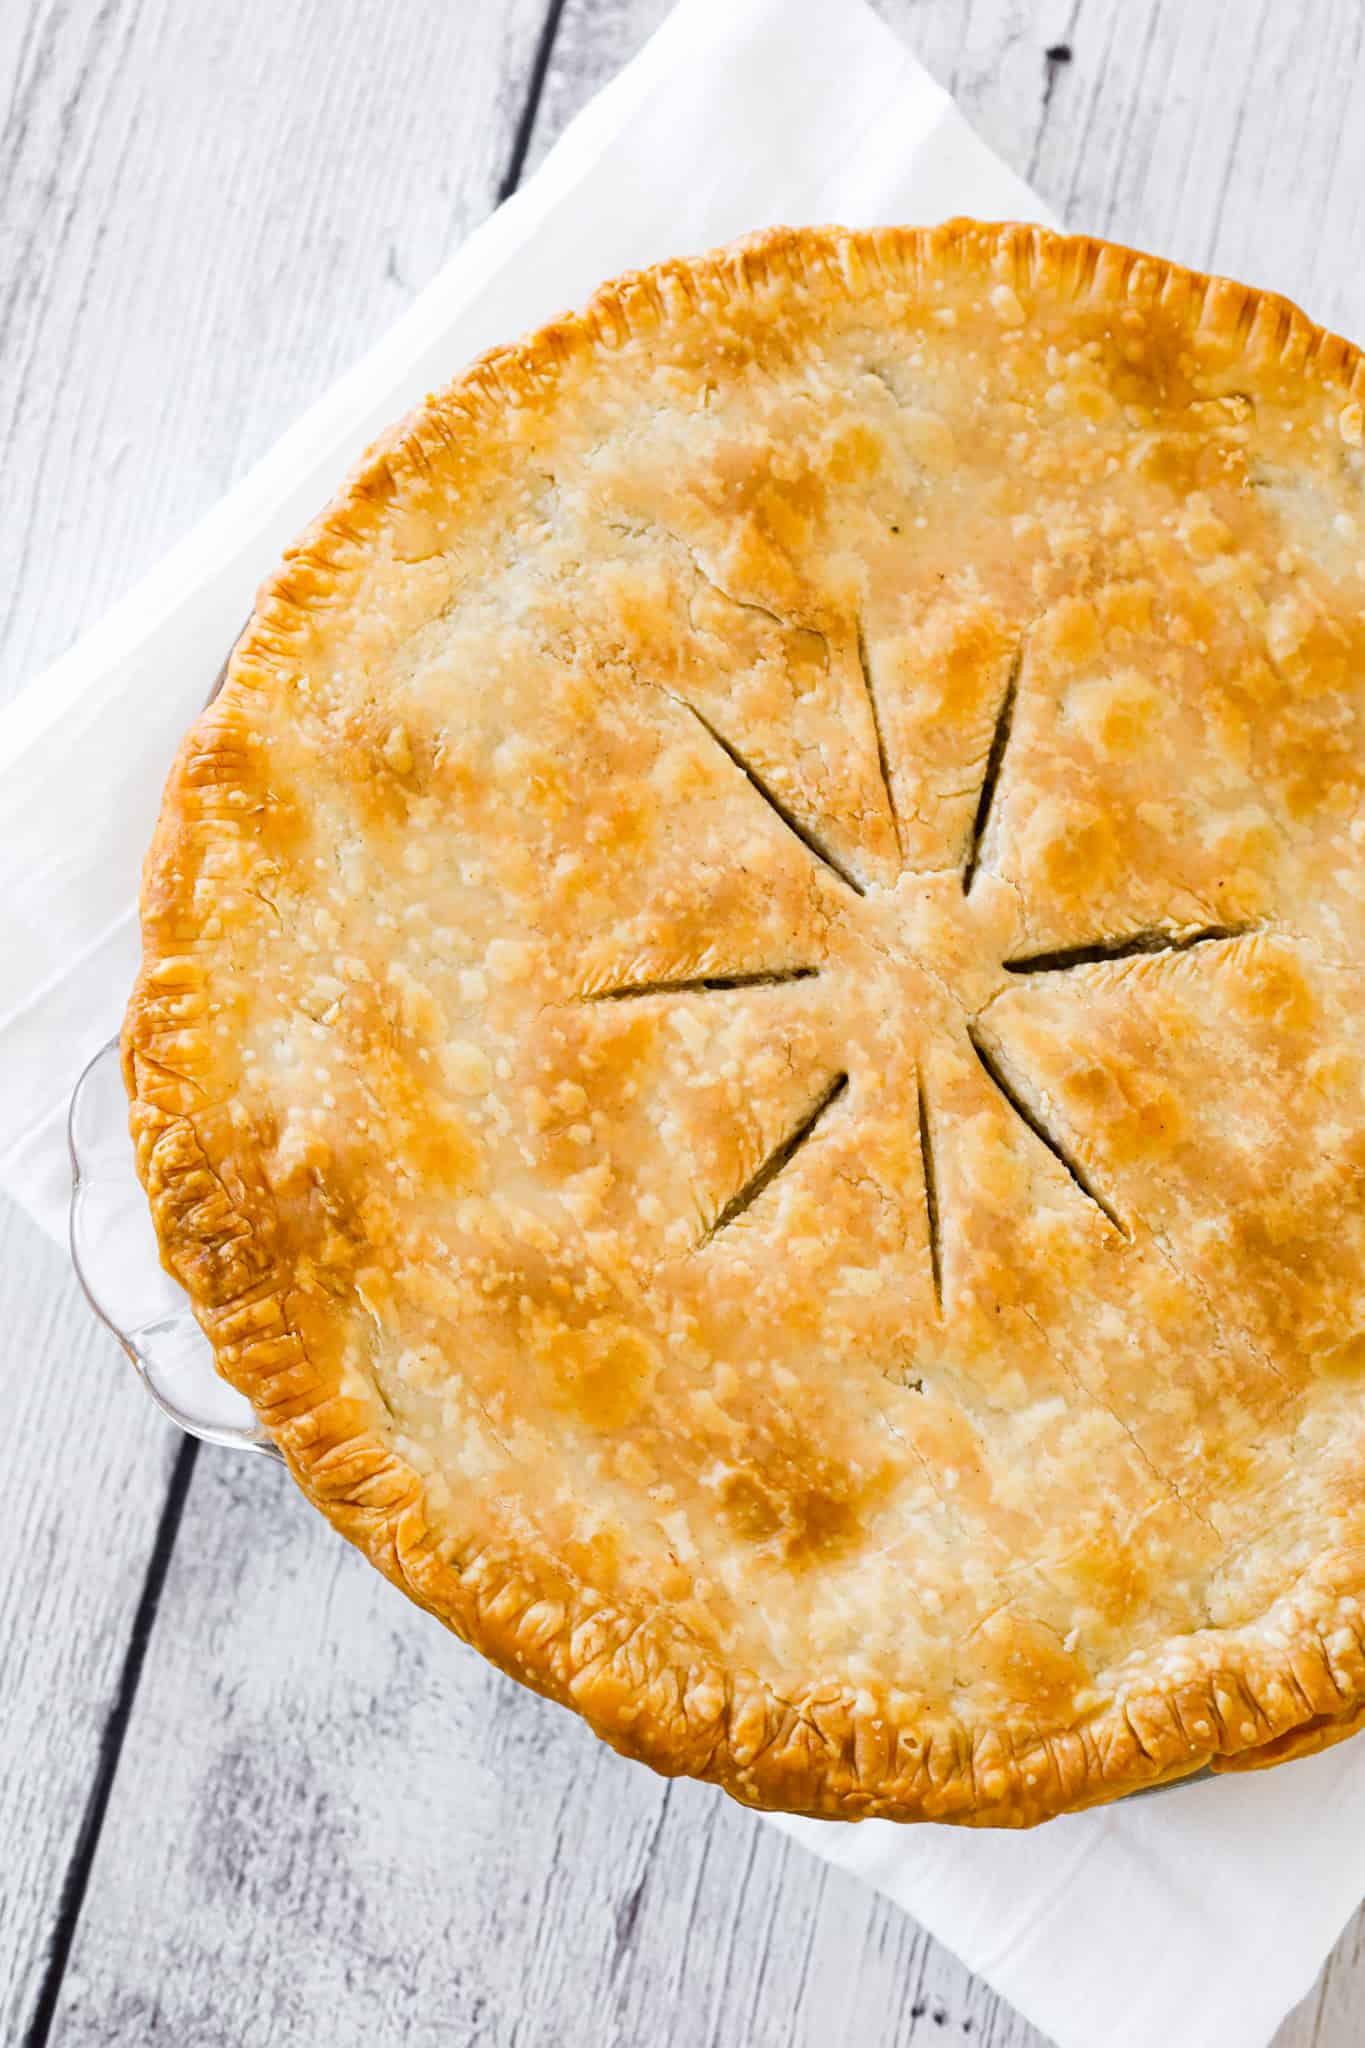 Meat Pie is a hearty dish made with ground beef, ground pork, mashed potatoes and spices all baked inside a flaky pie crust.